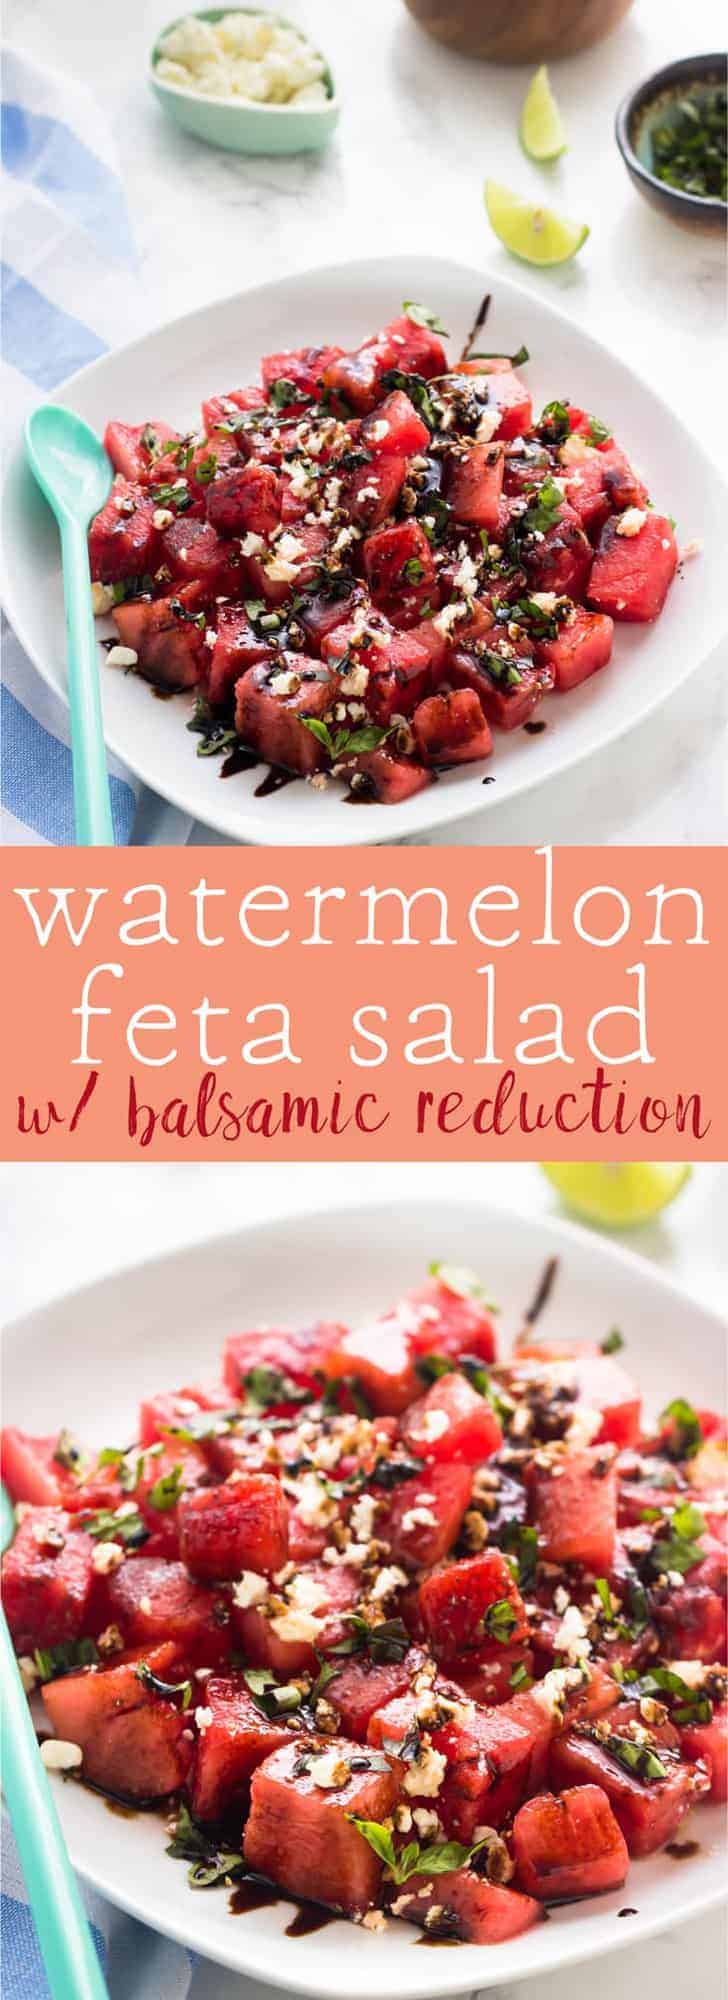 This Watermelon Feta Salad is fresh, juicy and drizzled with a delicious balsamic reduction. It's made in just 15 minutes! via https://jessicainthekitchen.com